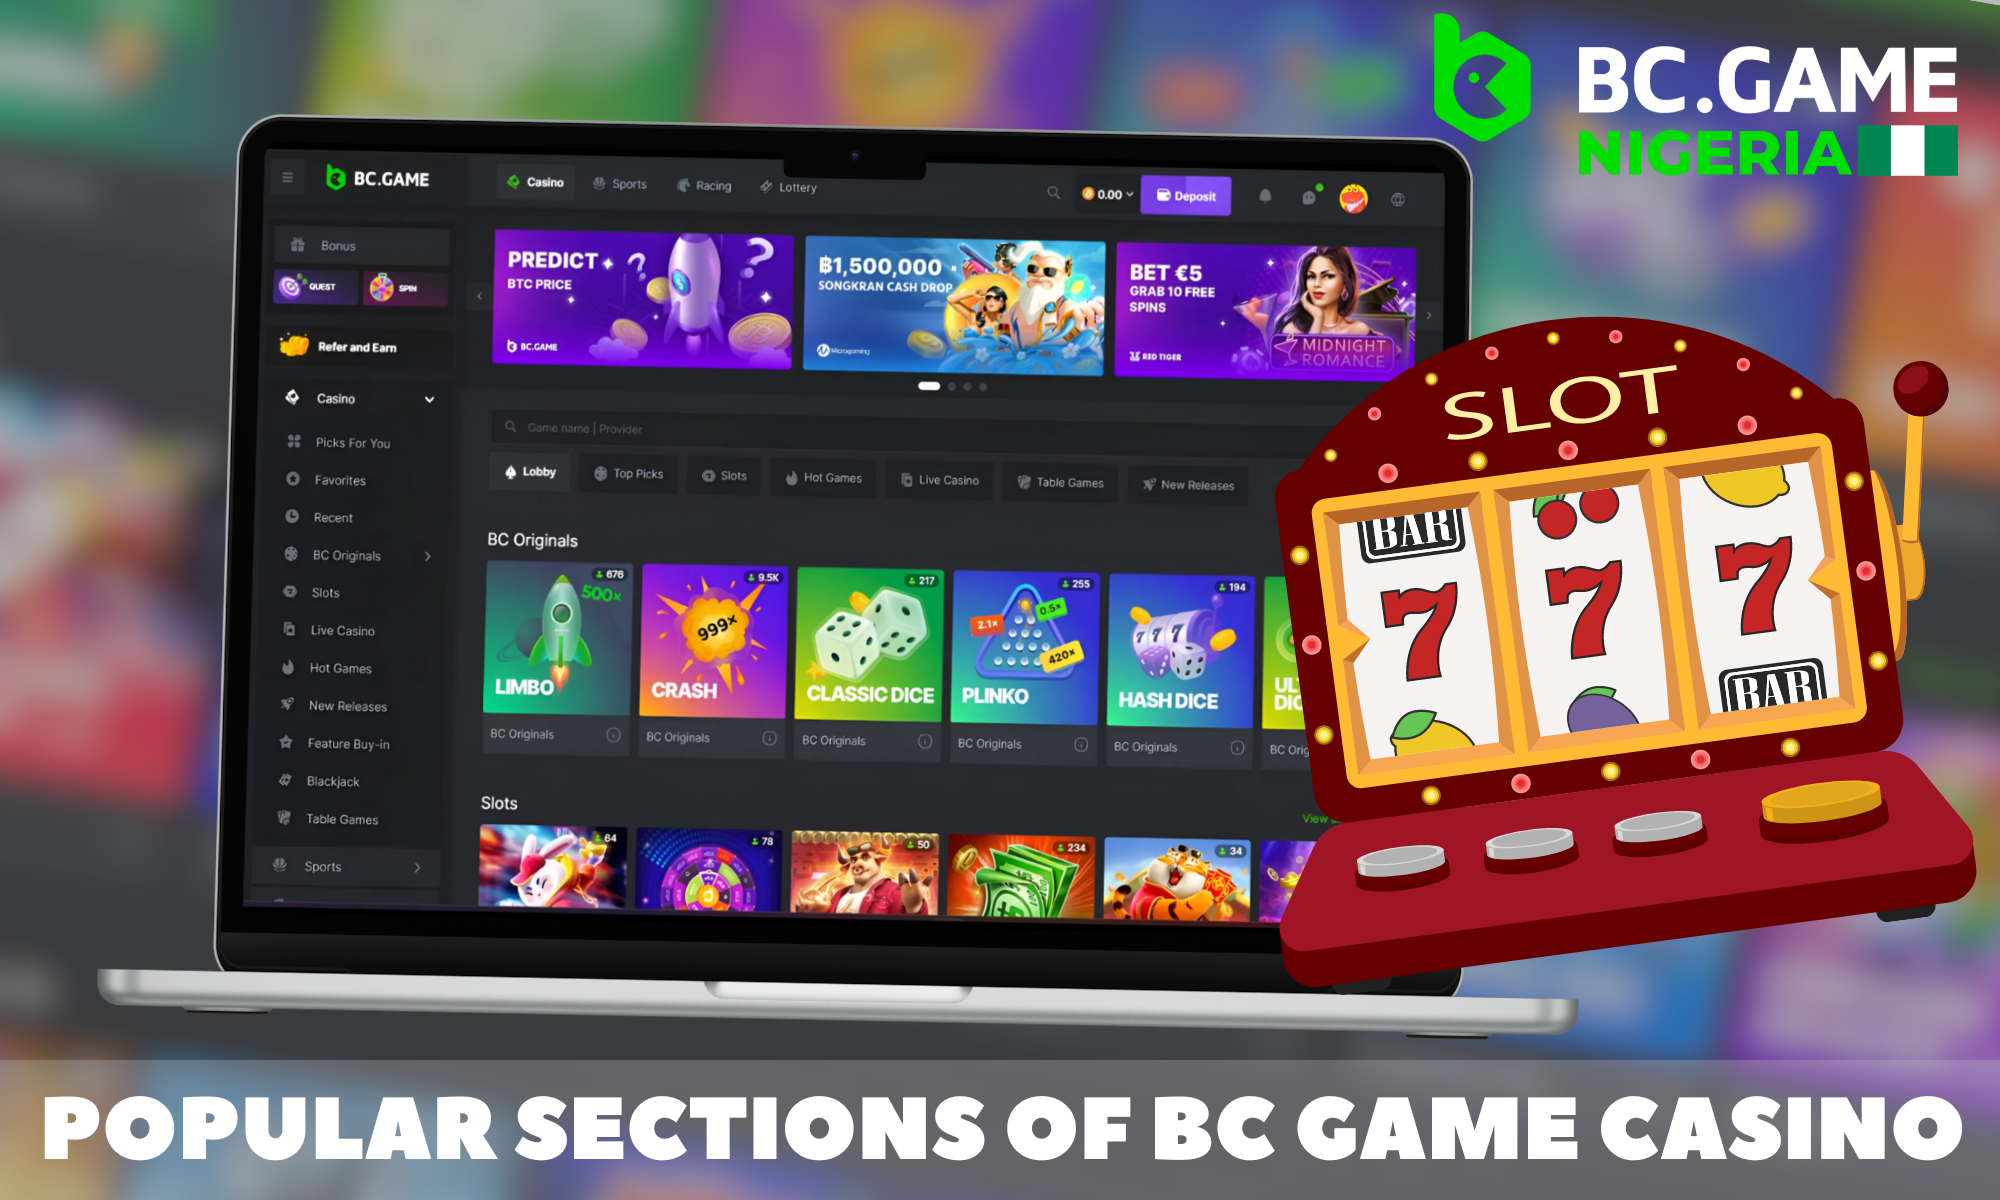 Overview of popular sections of BC Game casino